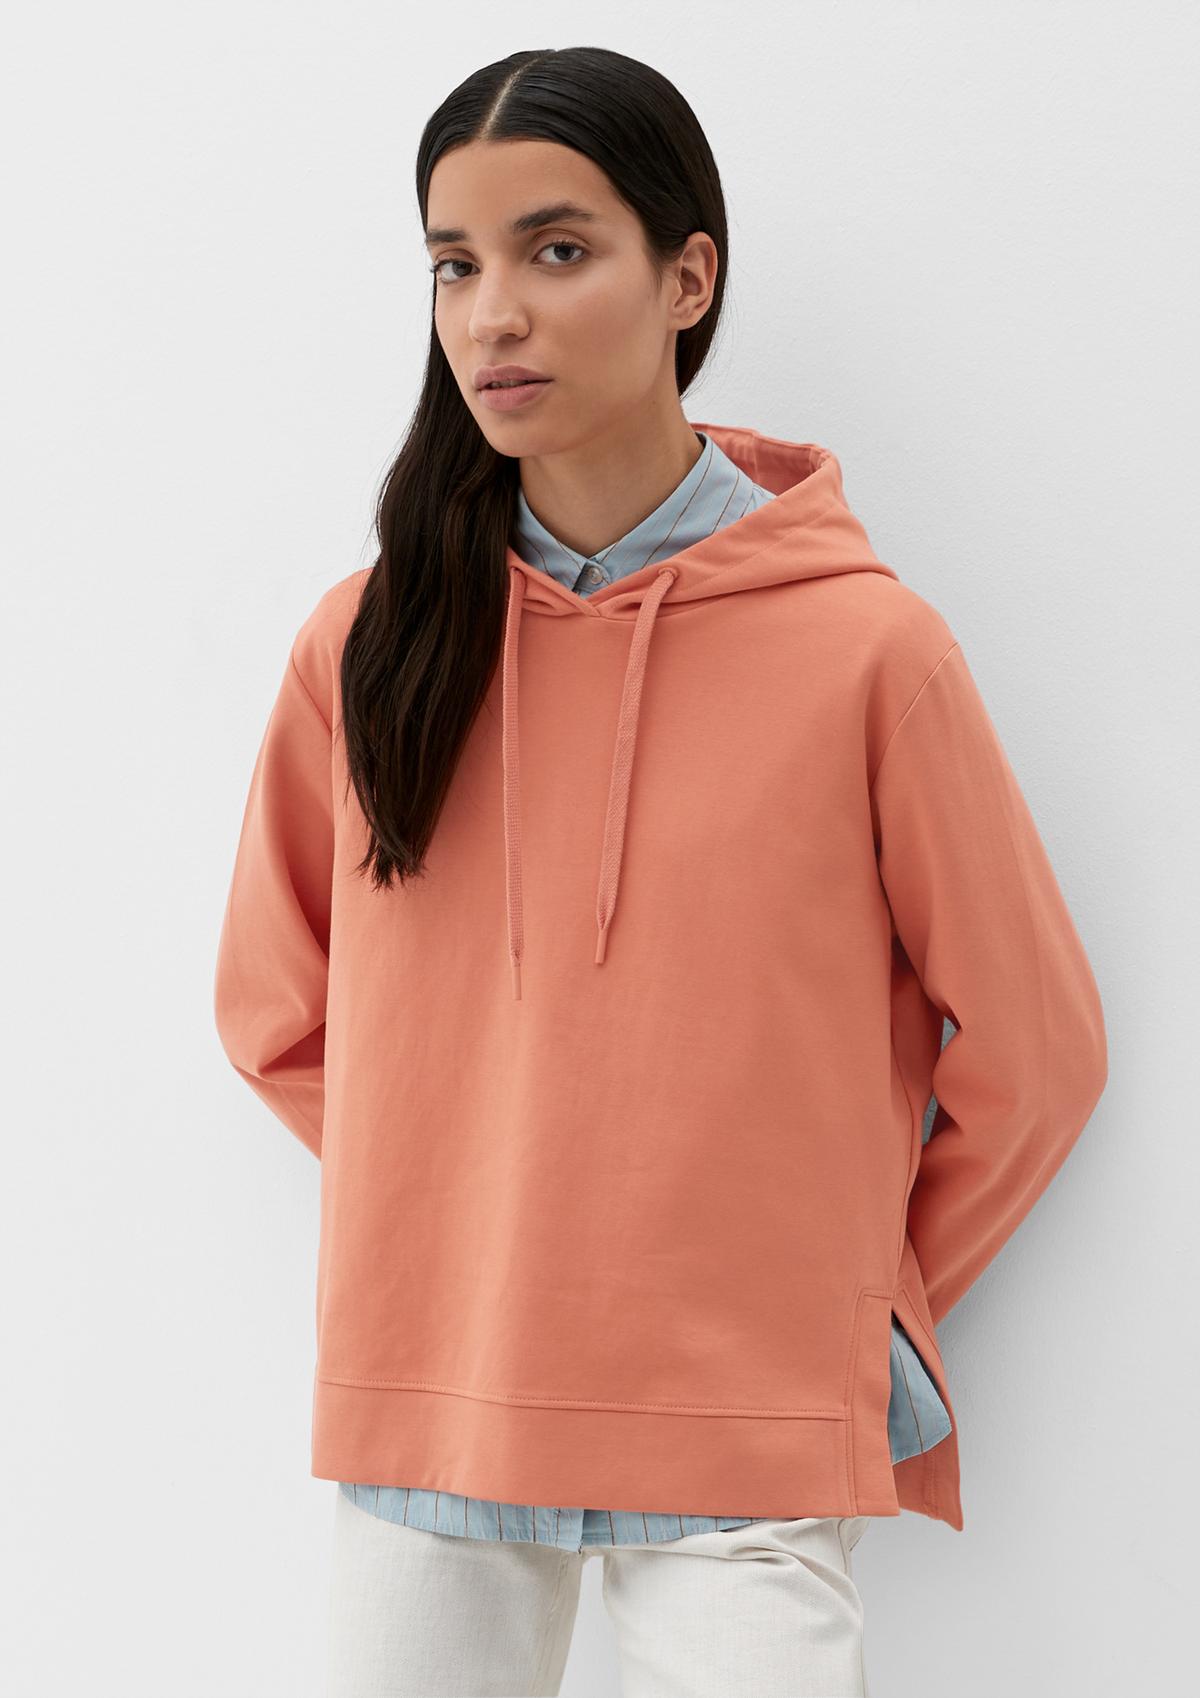 s.Oliver Hooded sweatshirt made of stretch cotton